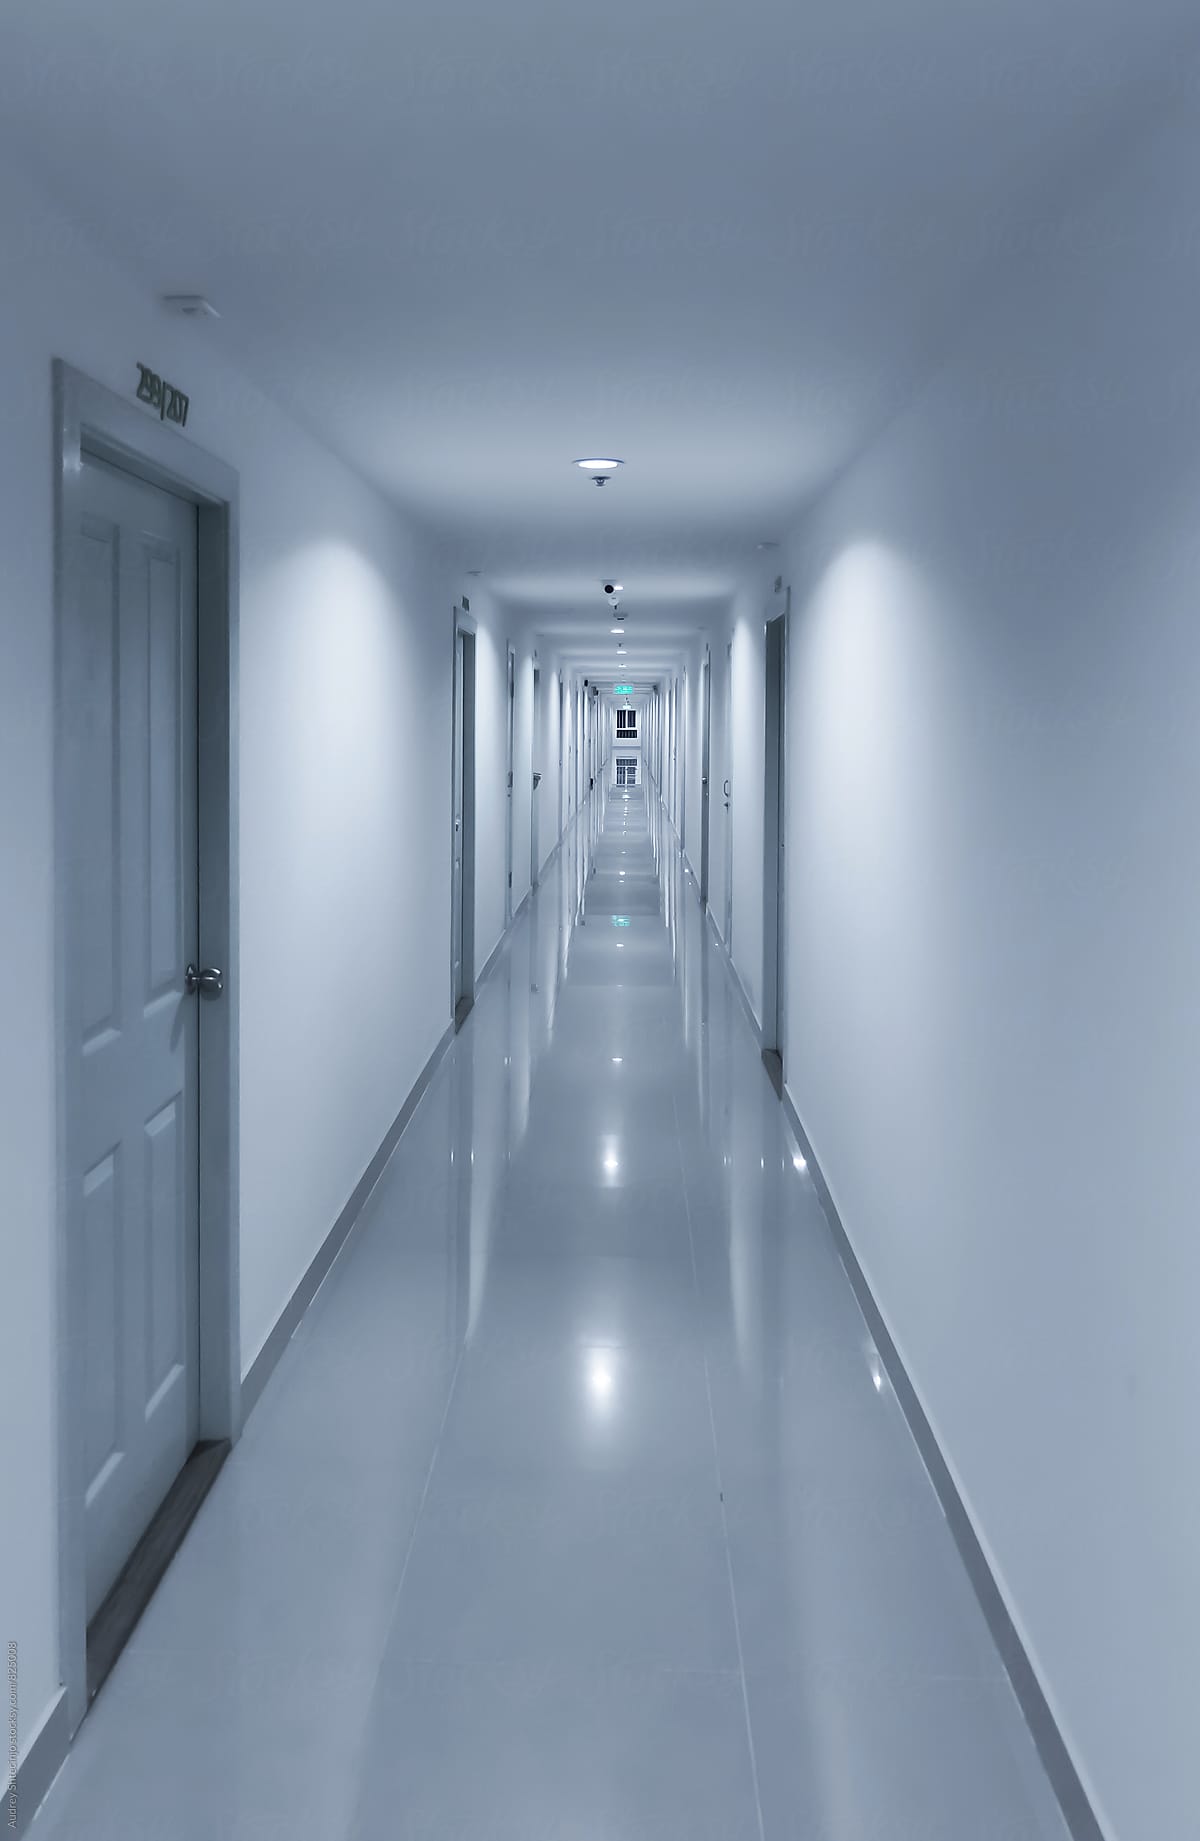 White corridor in perspective with doors on both sides.